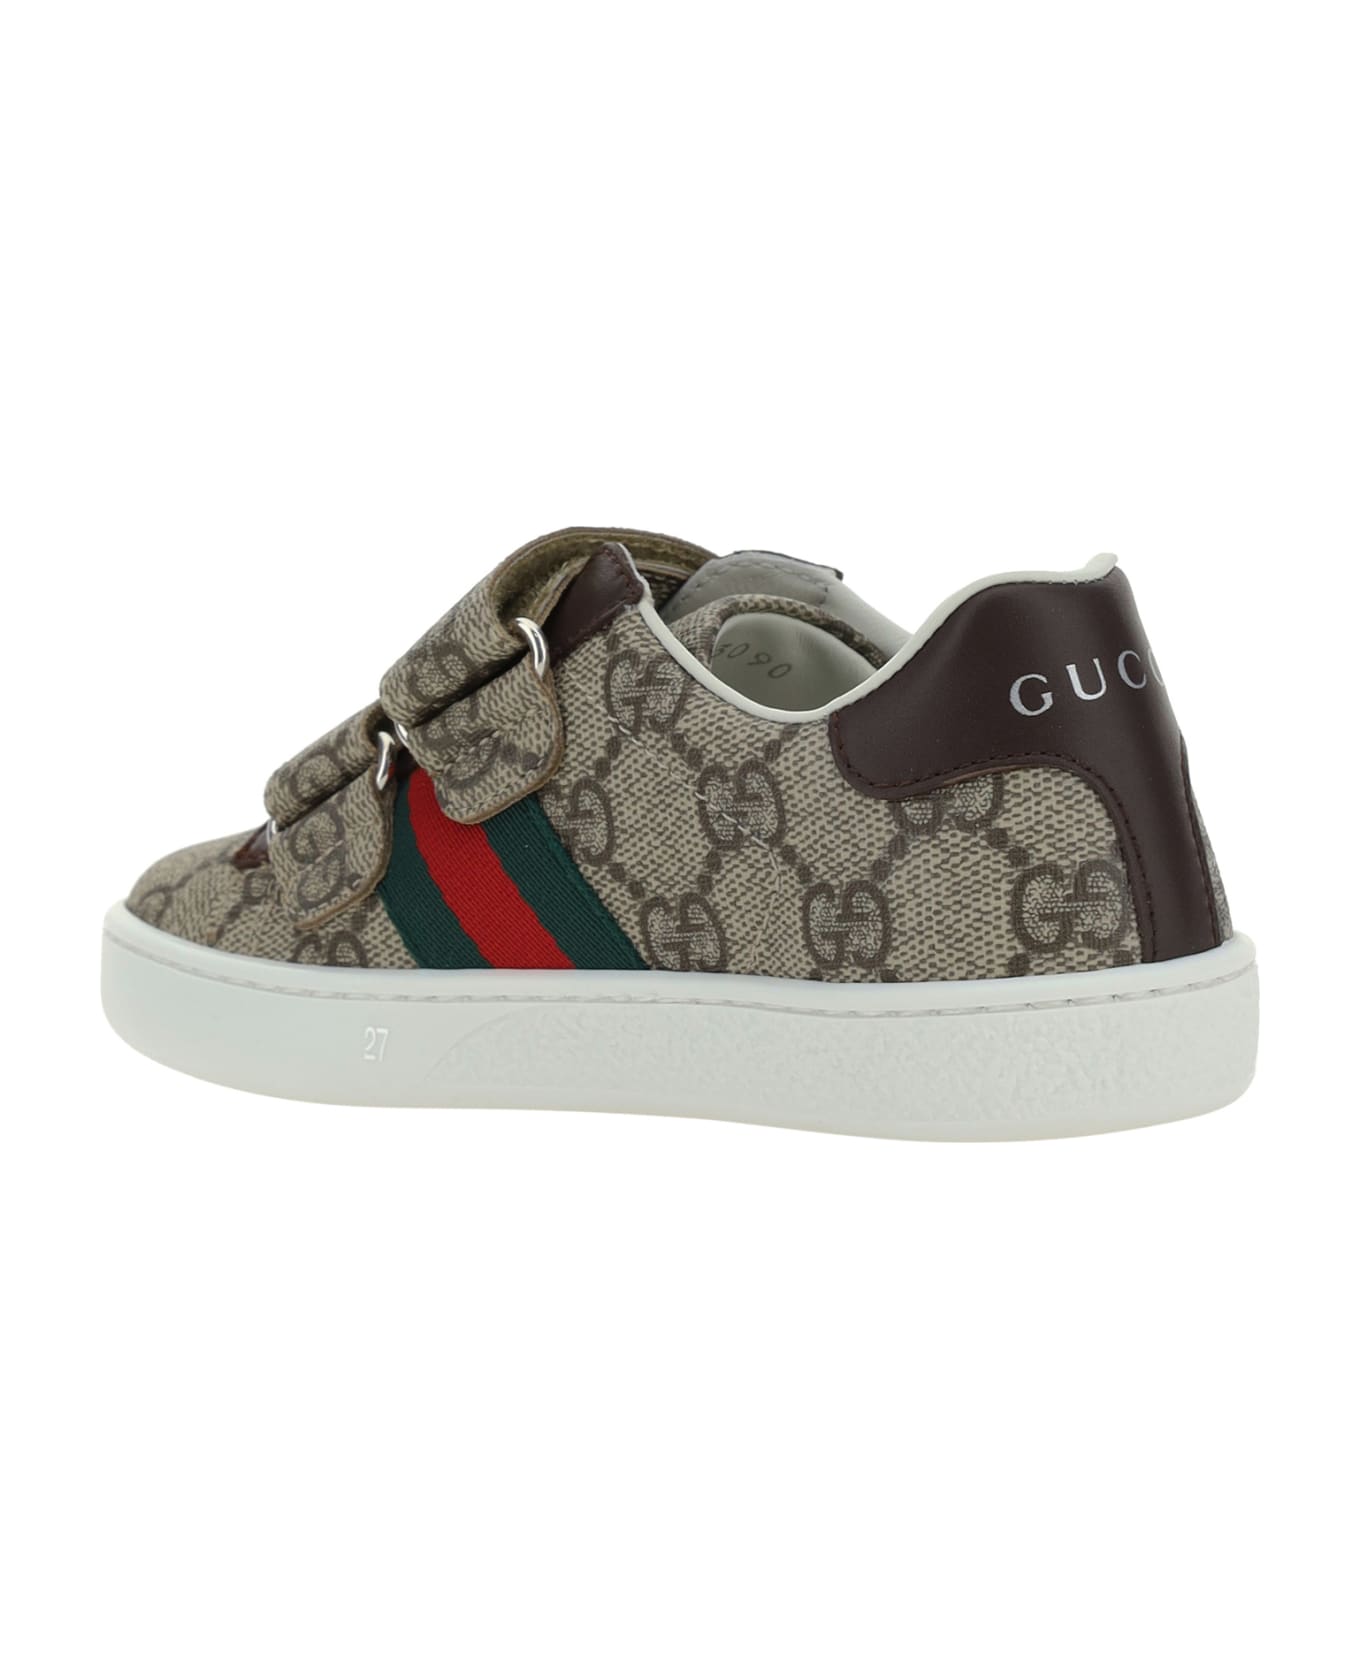 Gucci Sneakers For Boy